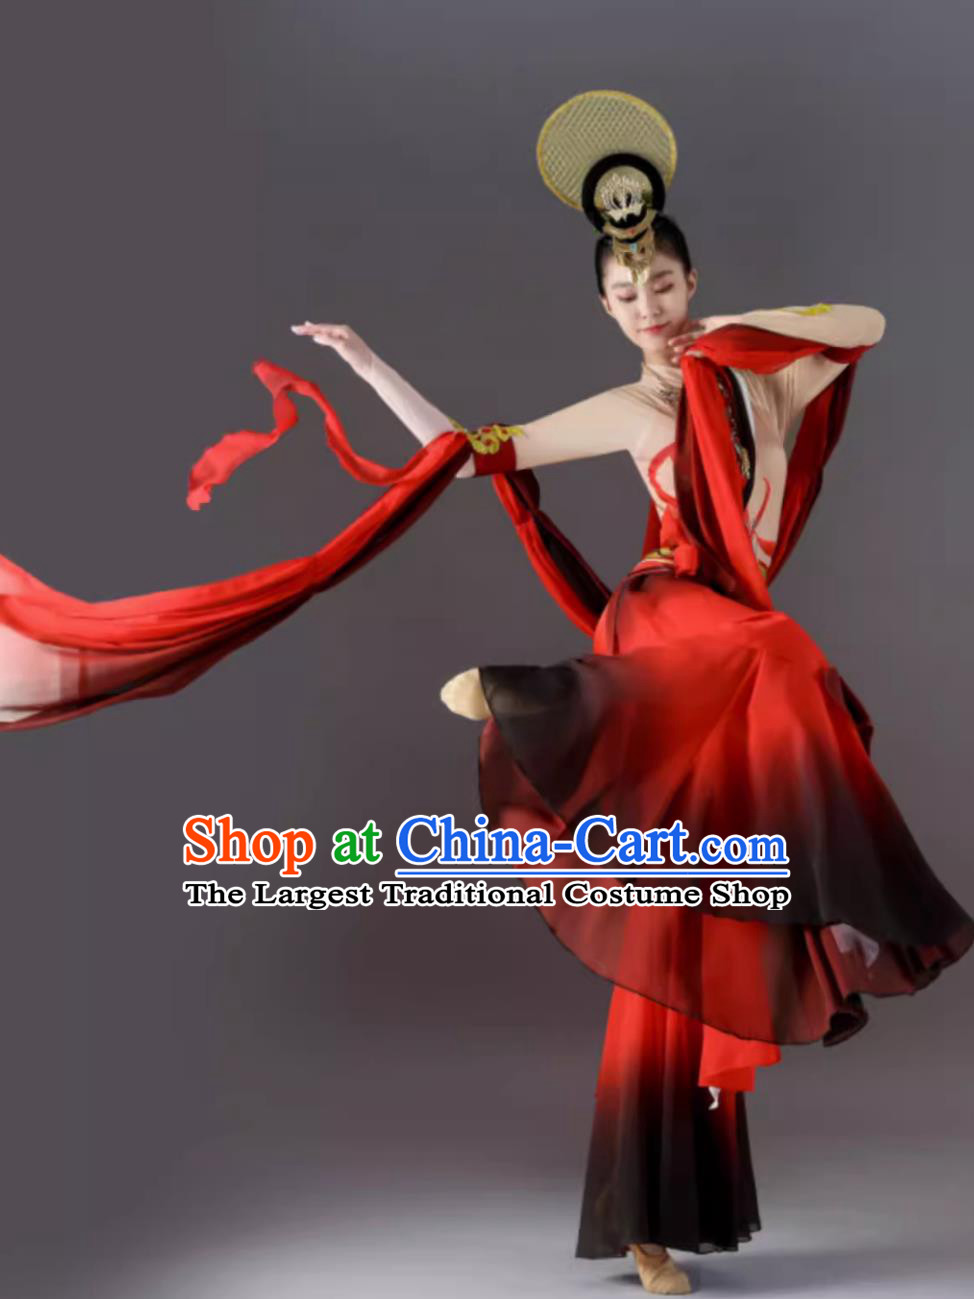 Dunhuang Feitian Dance Costume Exotic Performance Clothing Ancient Chinese Super Immortal Classical Dance Dress